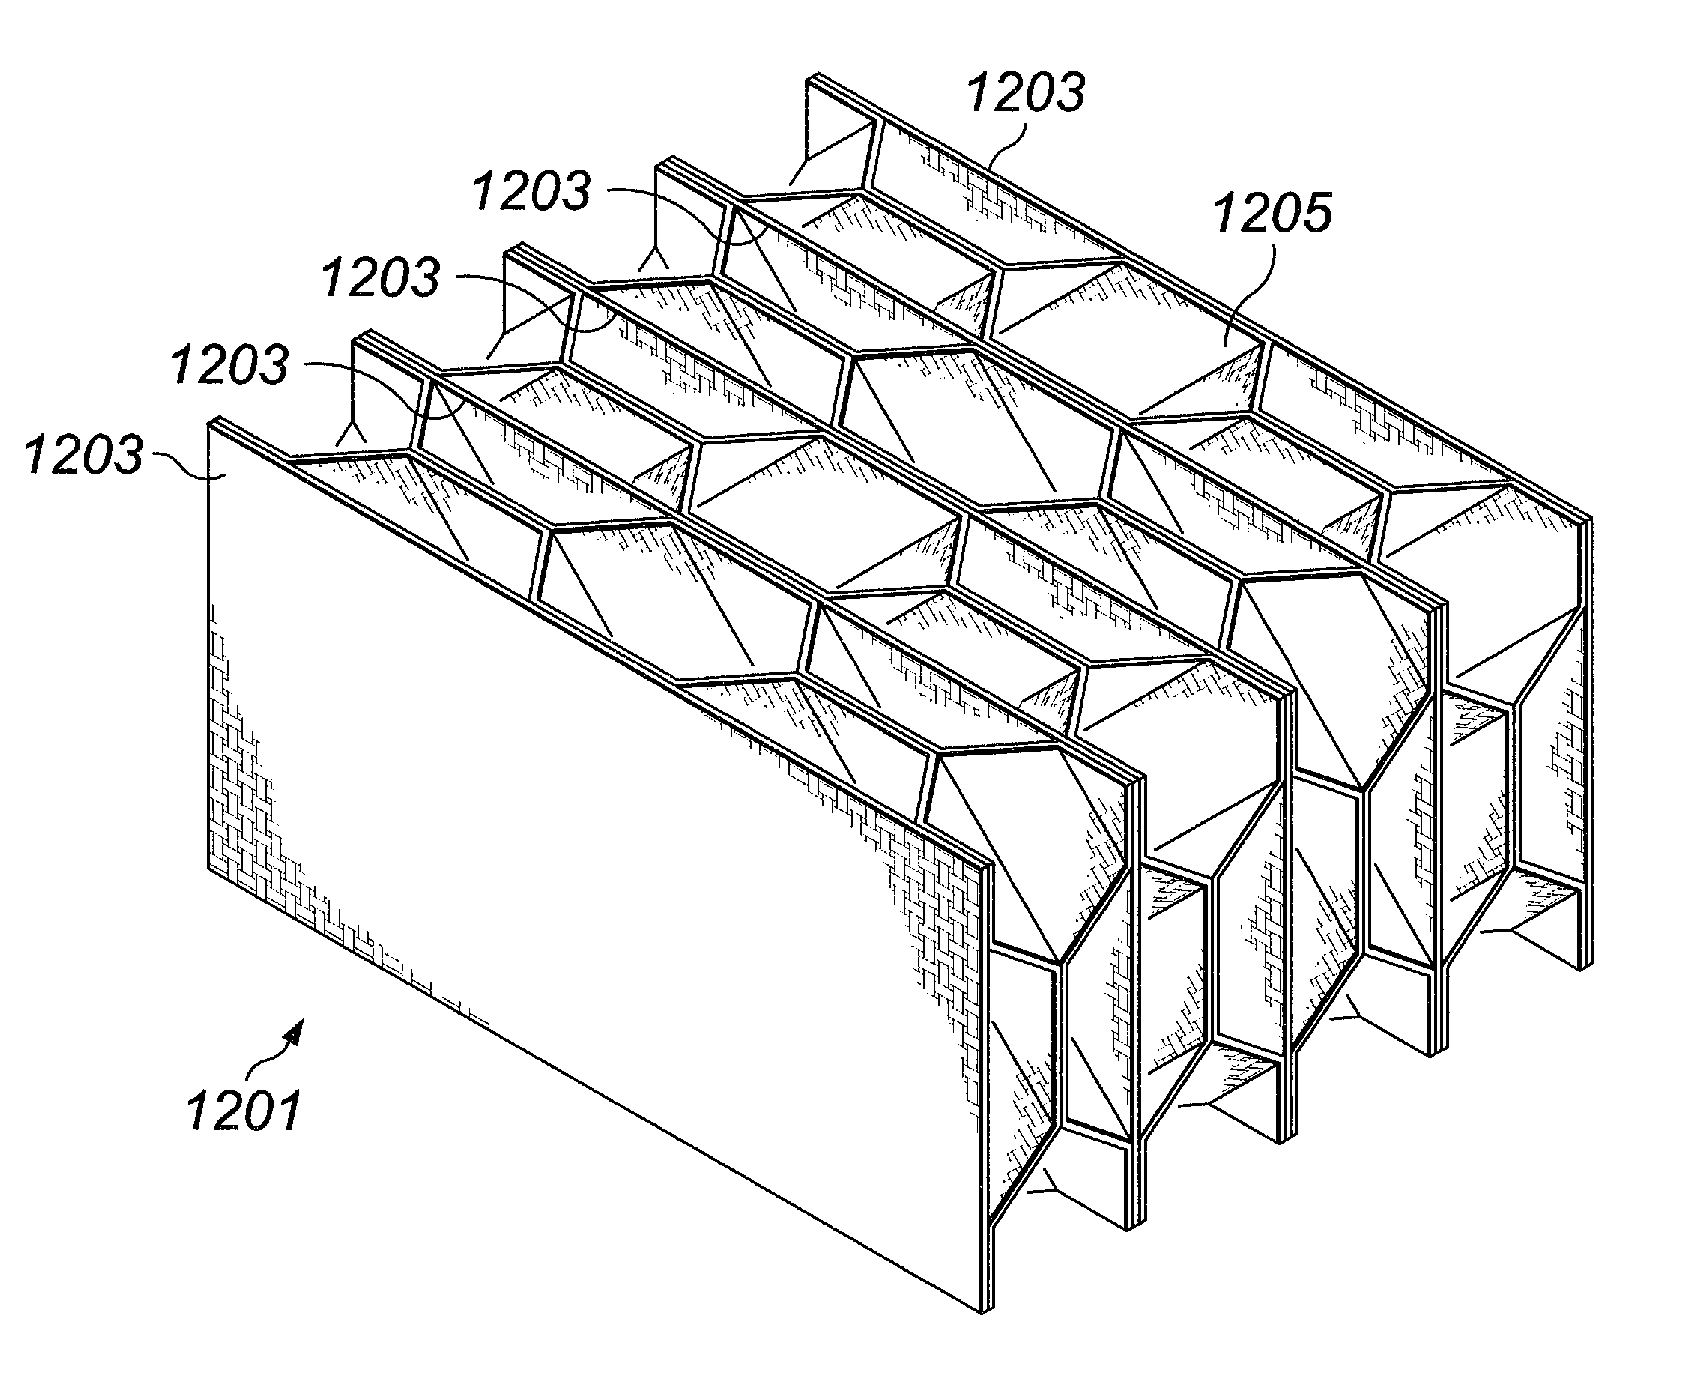 Optimized core for a structural assembly